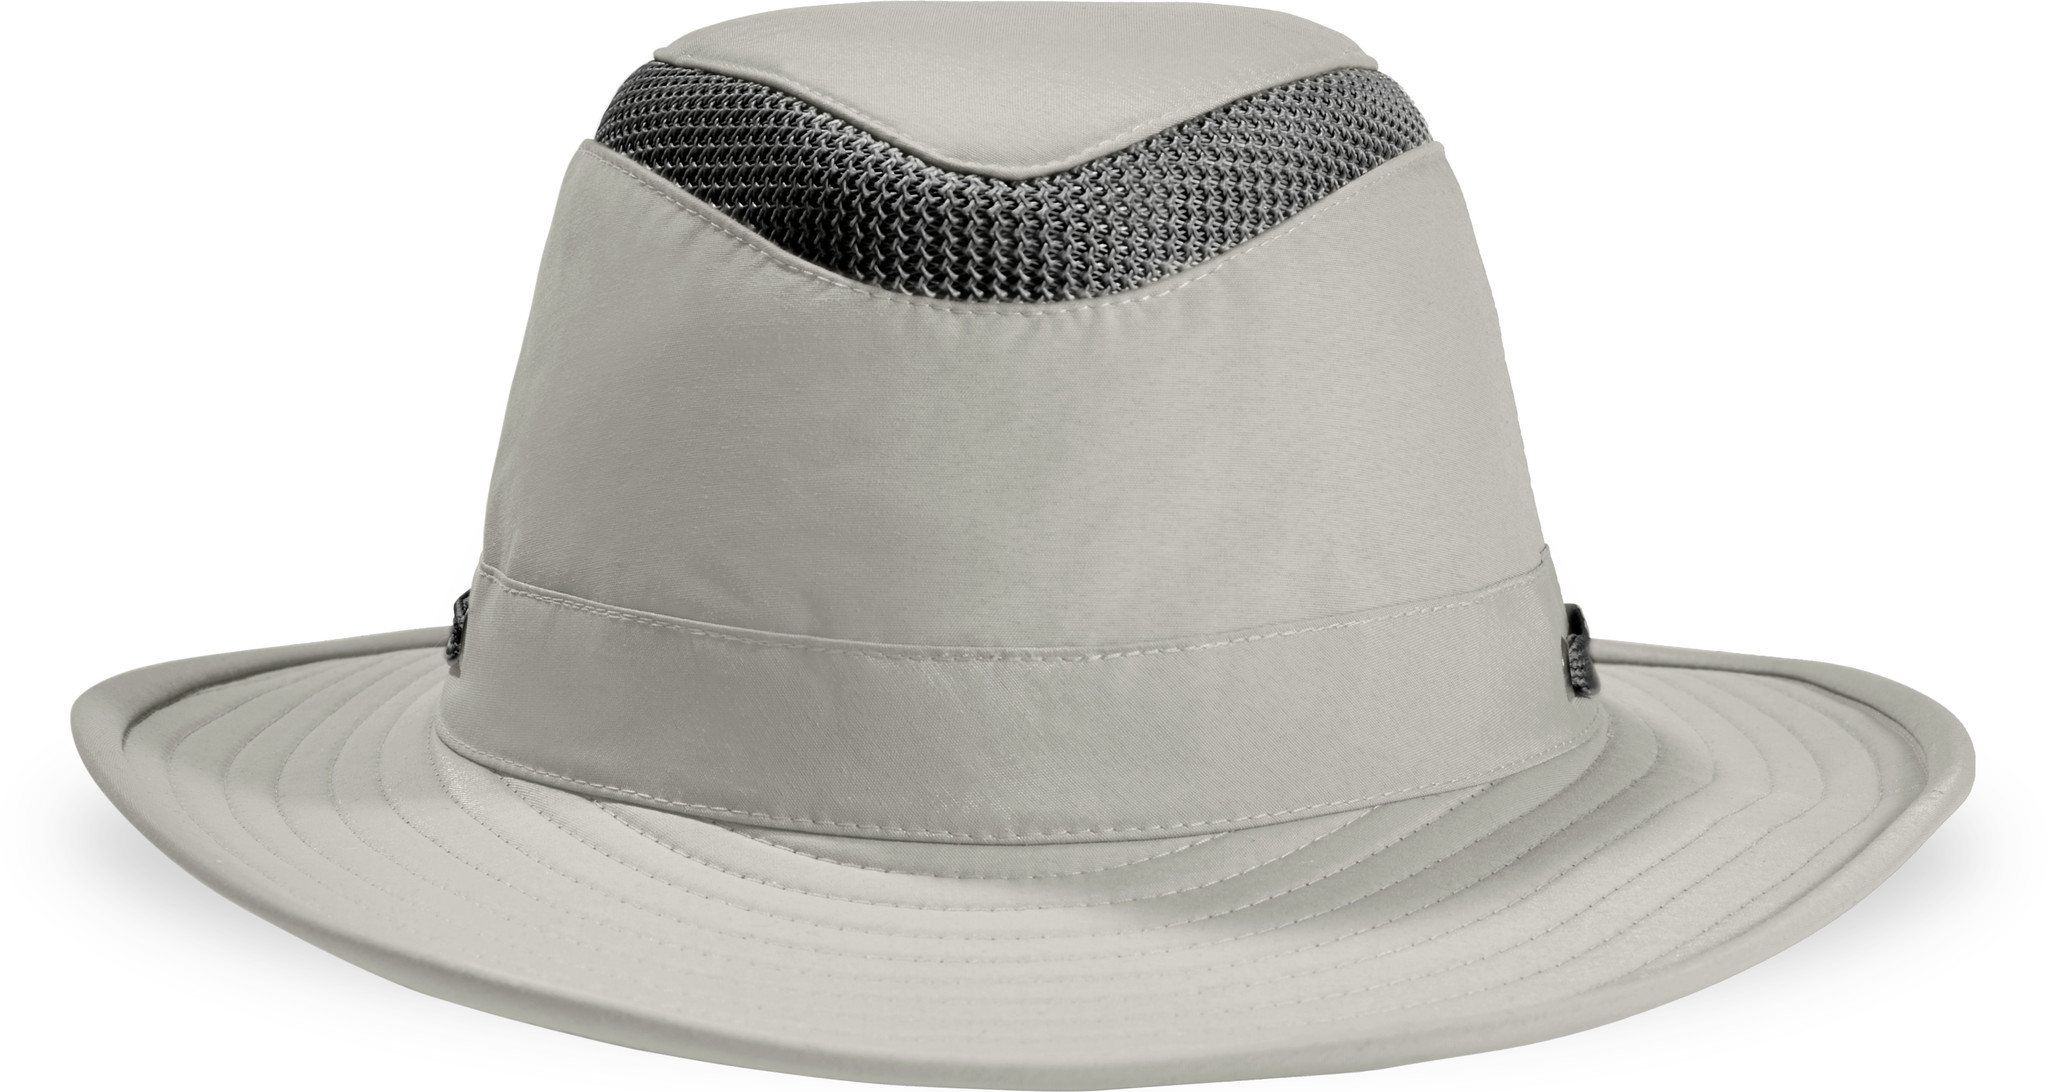 LTM6 Airflo Outdoors Hat TILLEY, Fast Shipping